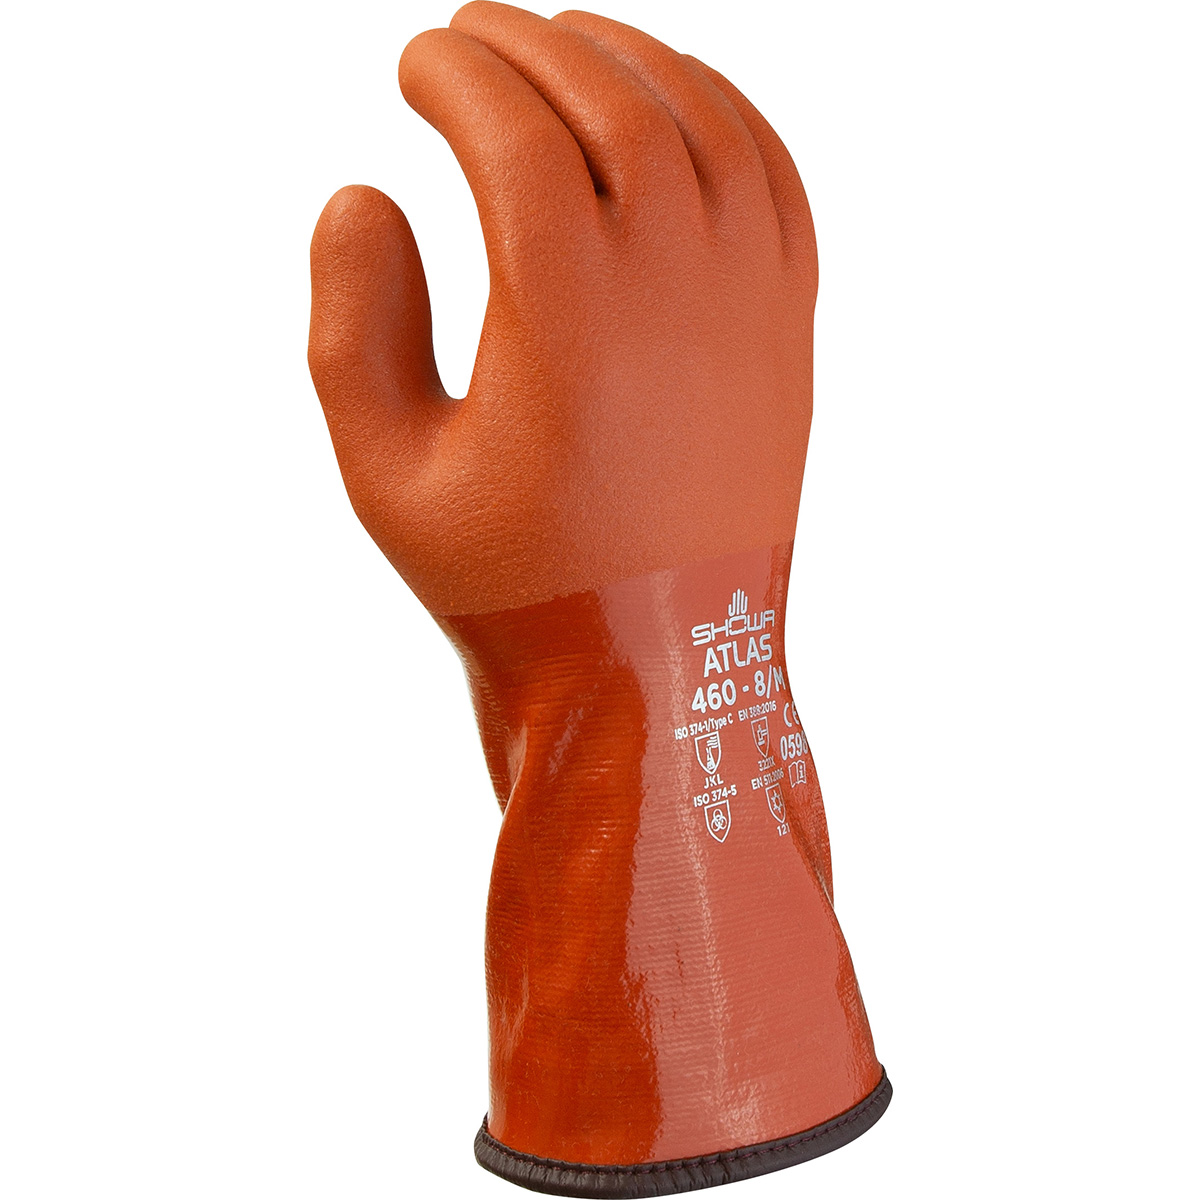 Chemical resistant PVC fully coated double dipped, insulated with seamless acrylic liner, orange, rough finish, extra large